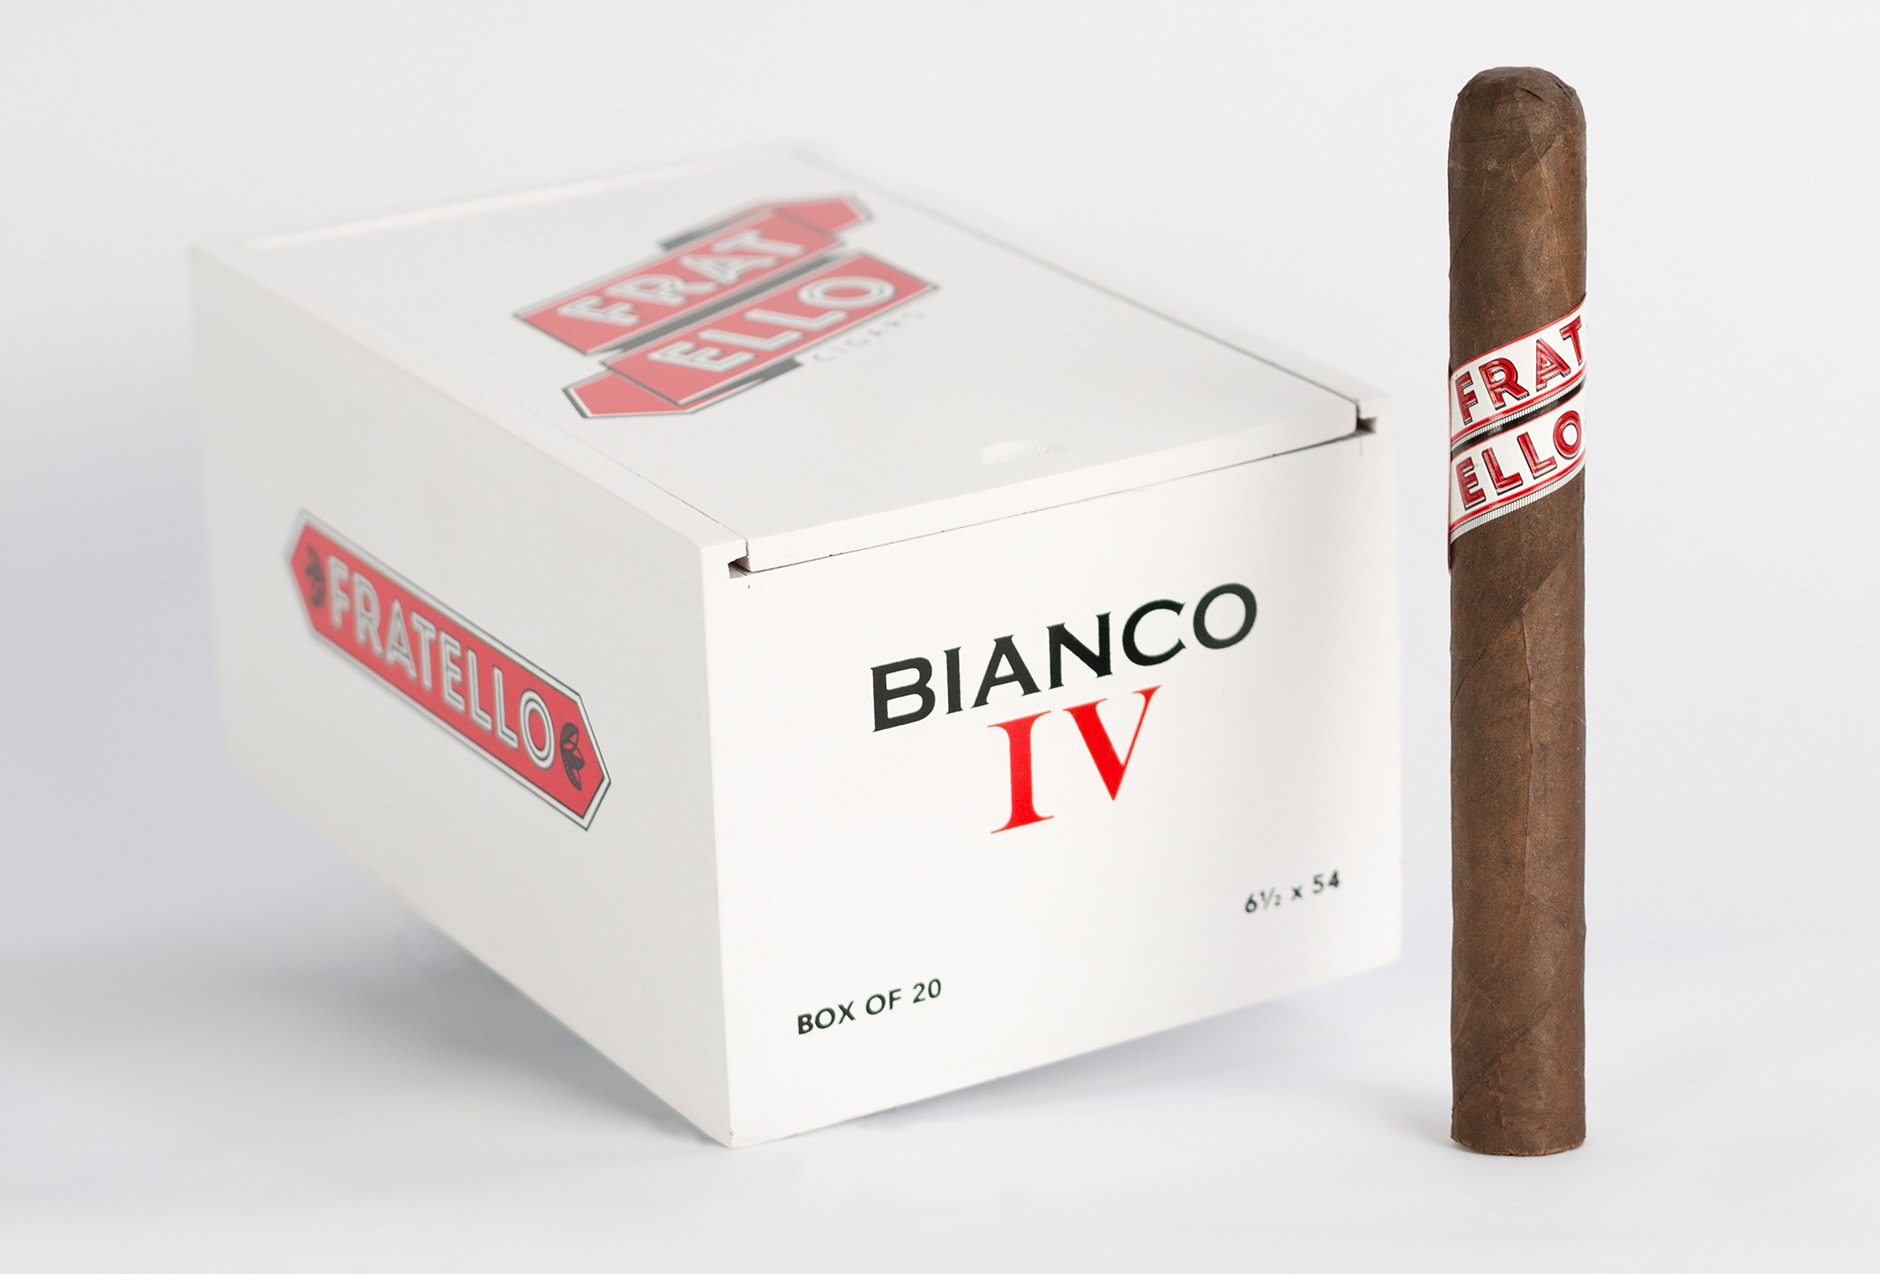 Fratello Bianco IV box and cigar feature